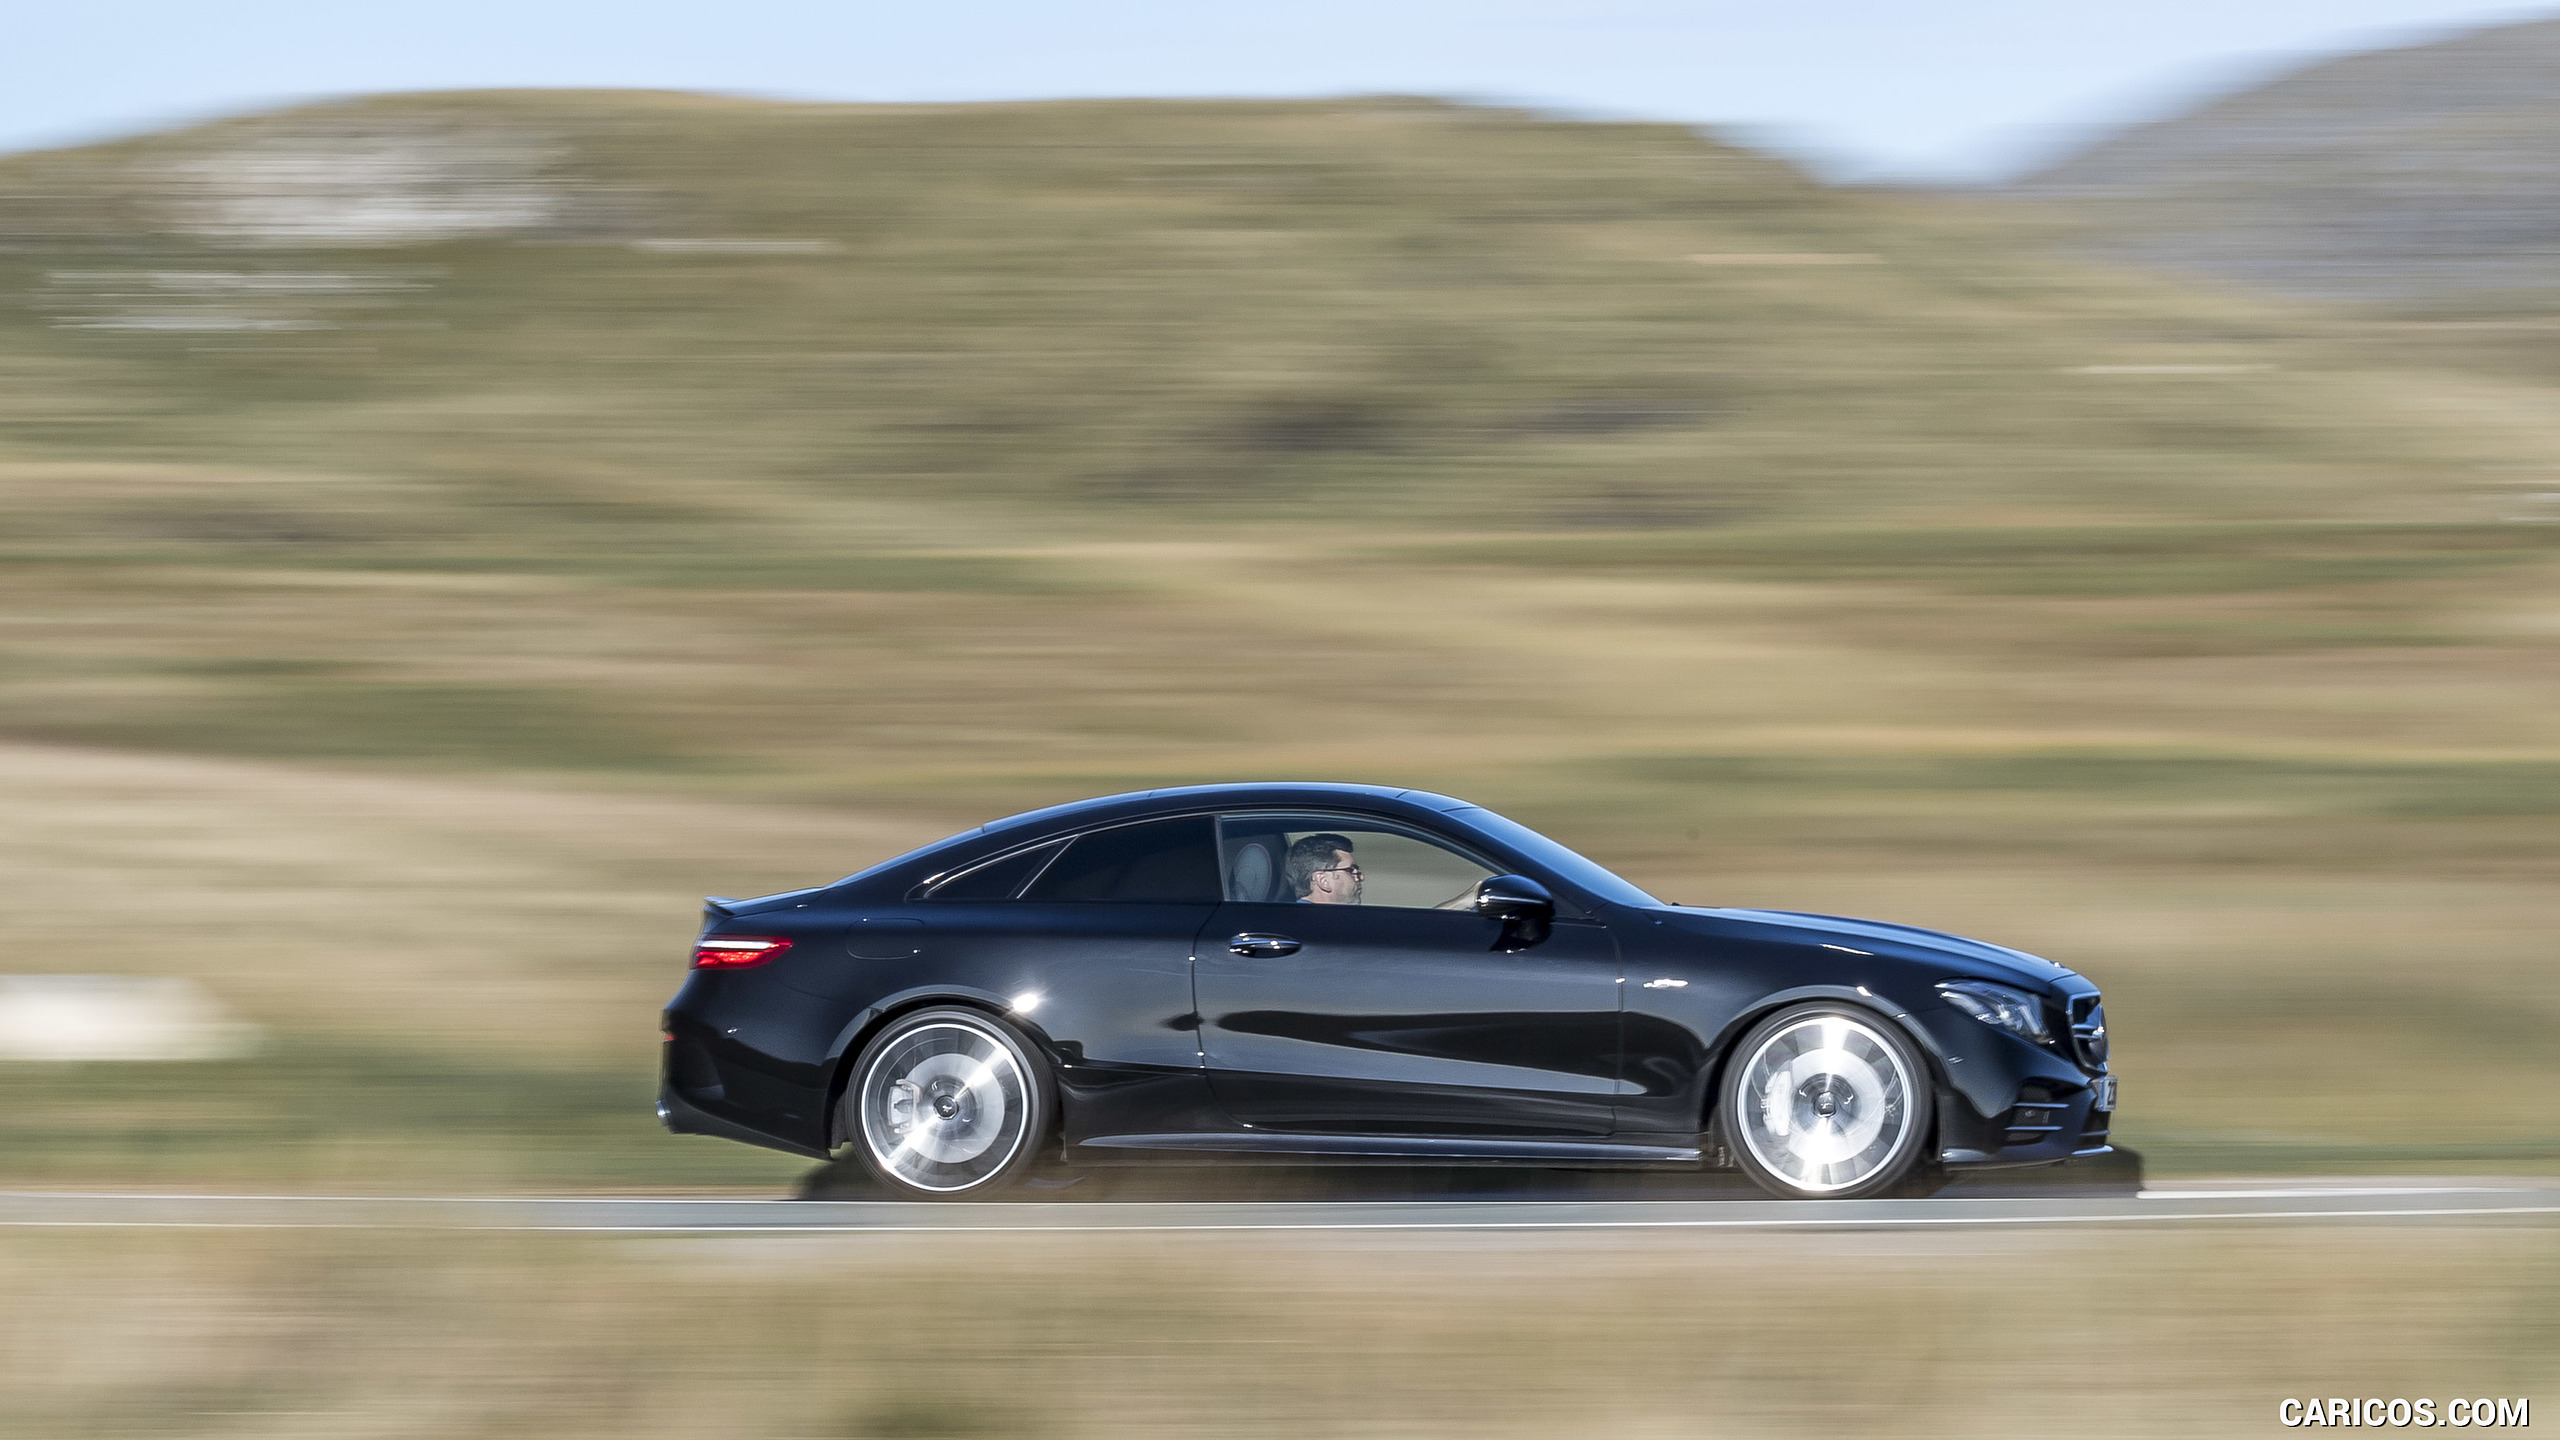 2019 Mercedes-AMG E 53 Coupe (UK-Spec) - Side, #17 of 166